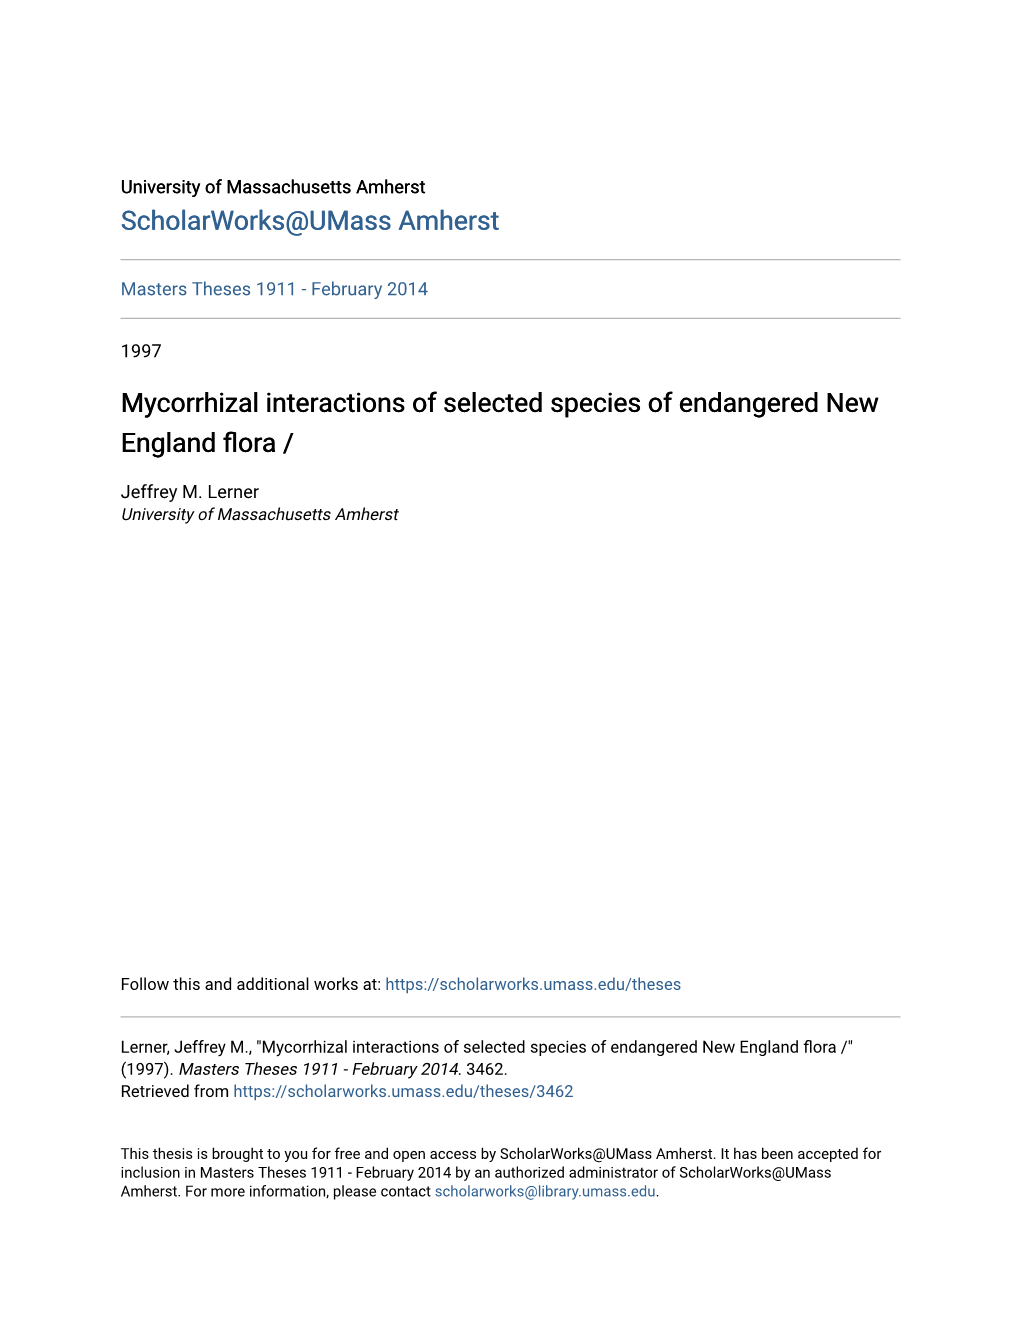 Mycorrhizal Interactions of Selected Species of Endangered New England Flora